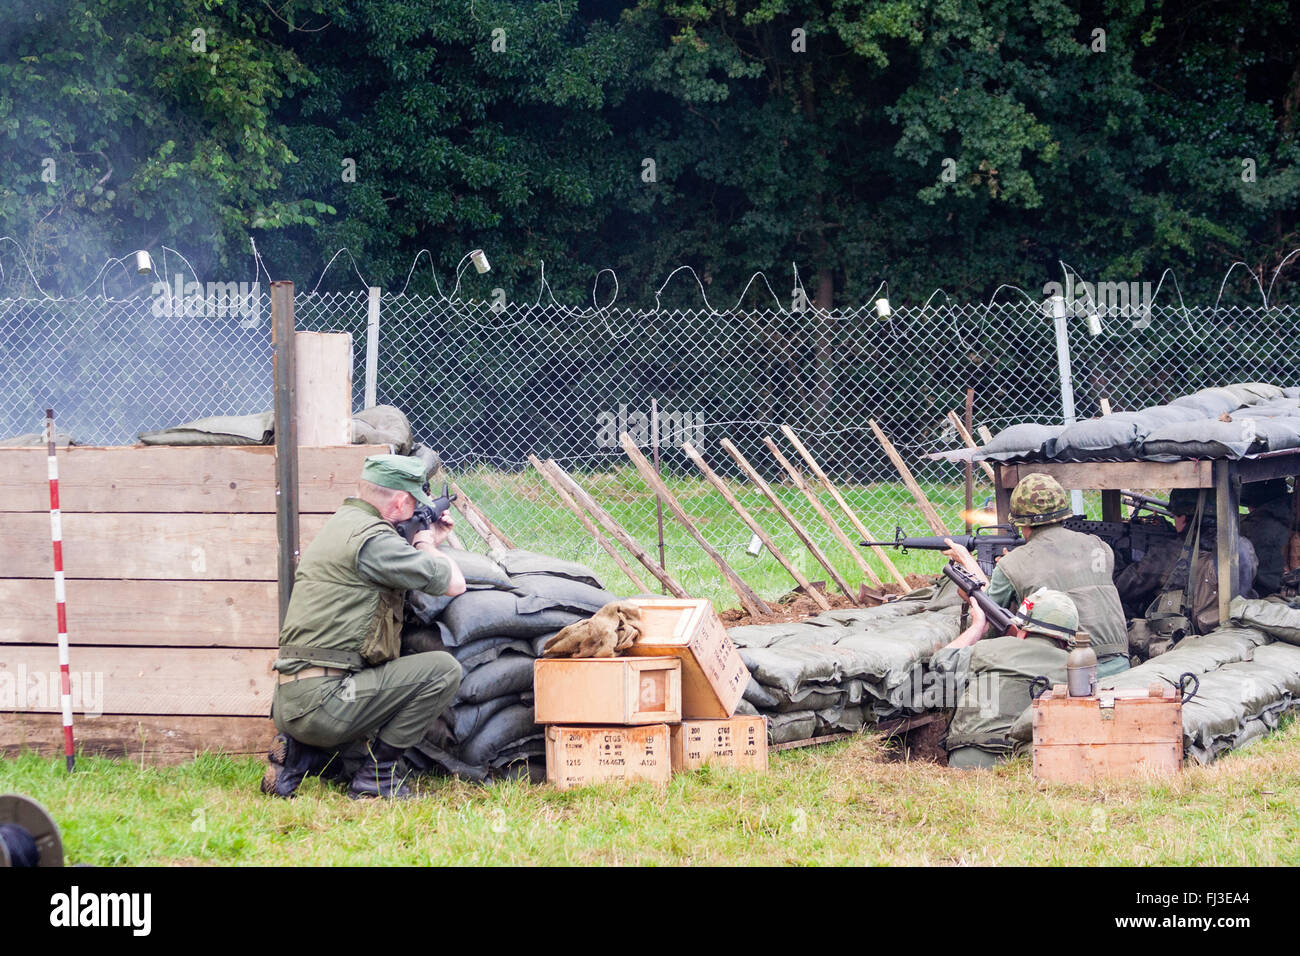 War and peace show, England. Vietnam war re-enactment. American fire base under attack by unseen enemy in woods, soldiers behind wire returning fire. Stock Photo